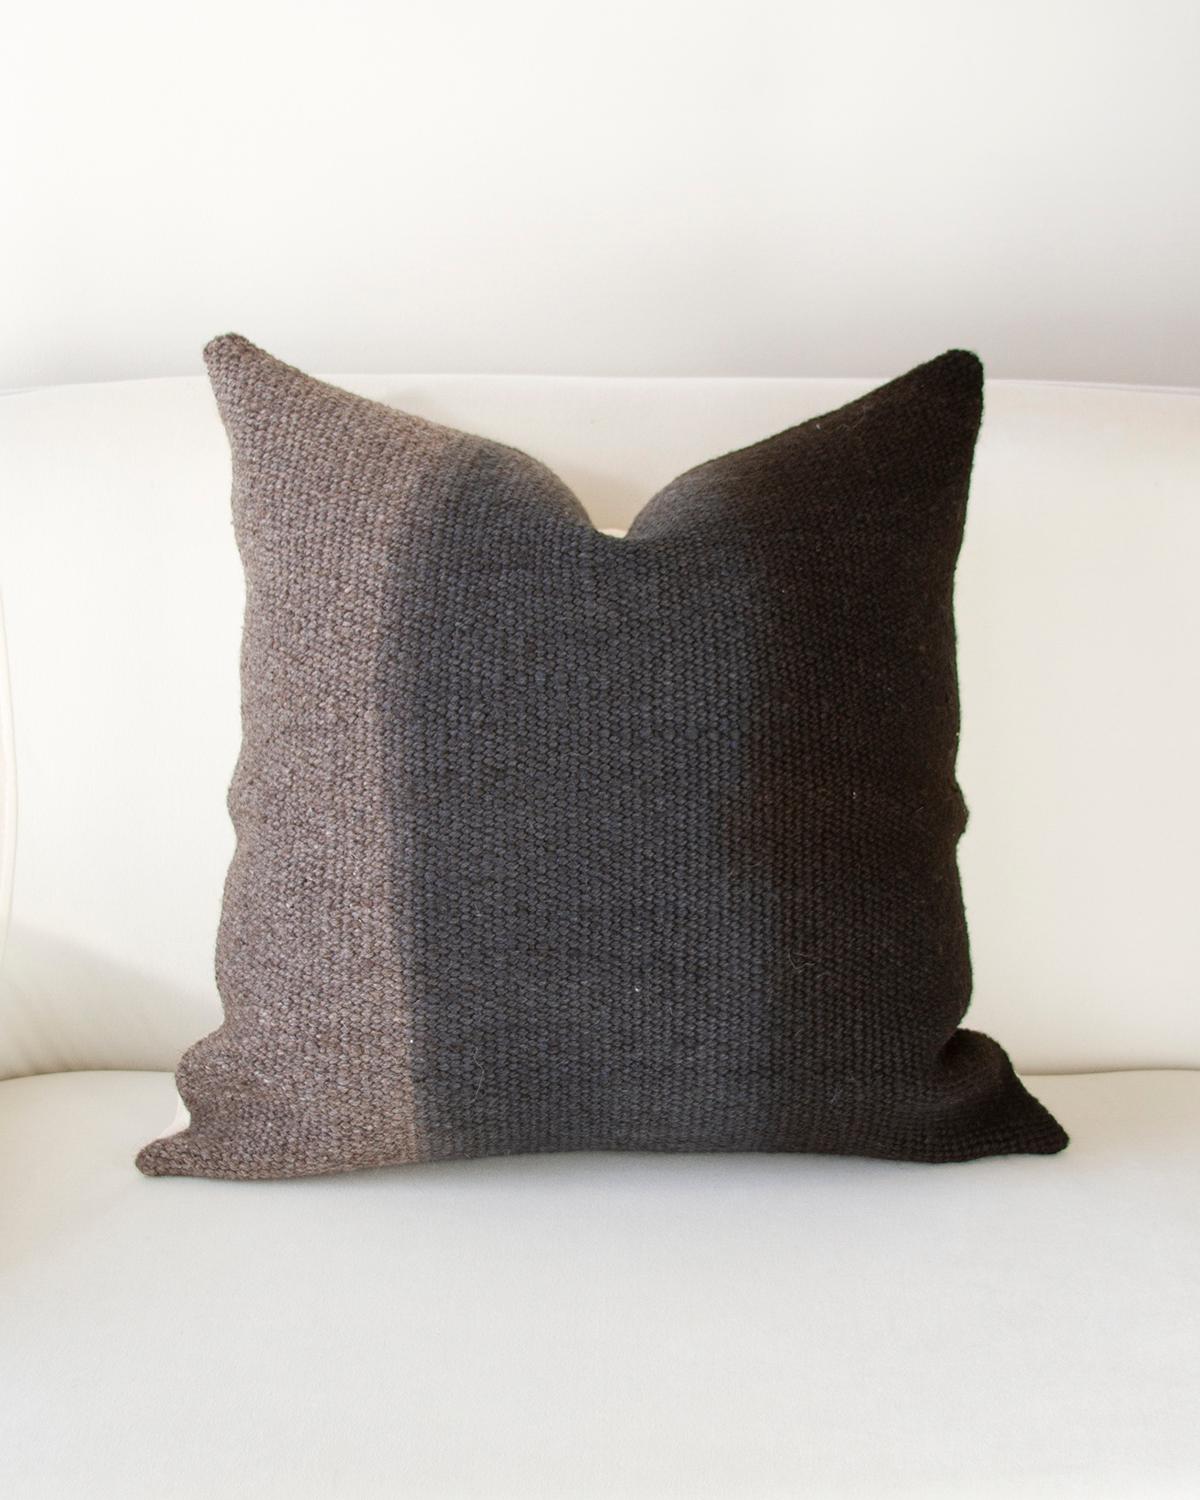 Argentine Matiz Gray Ombre Throw Pillow Handwoven Textured Sheep Wool For Sale